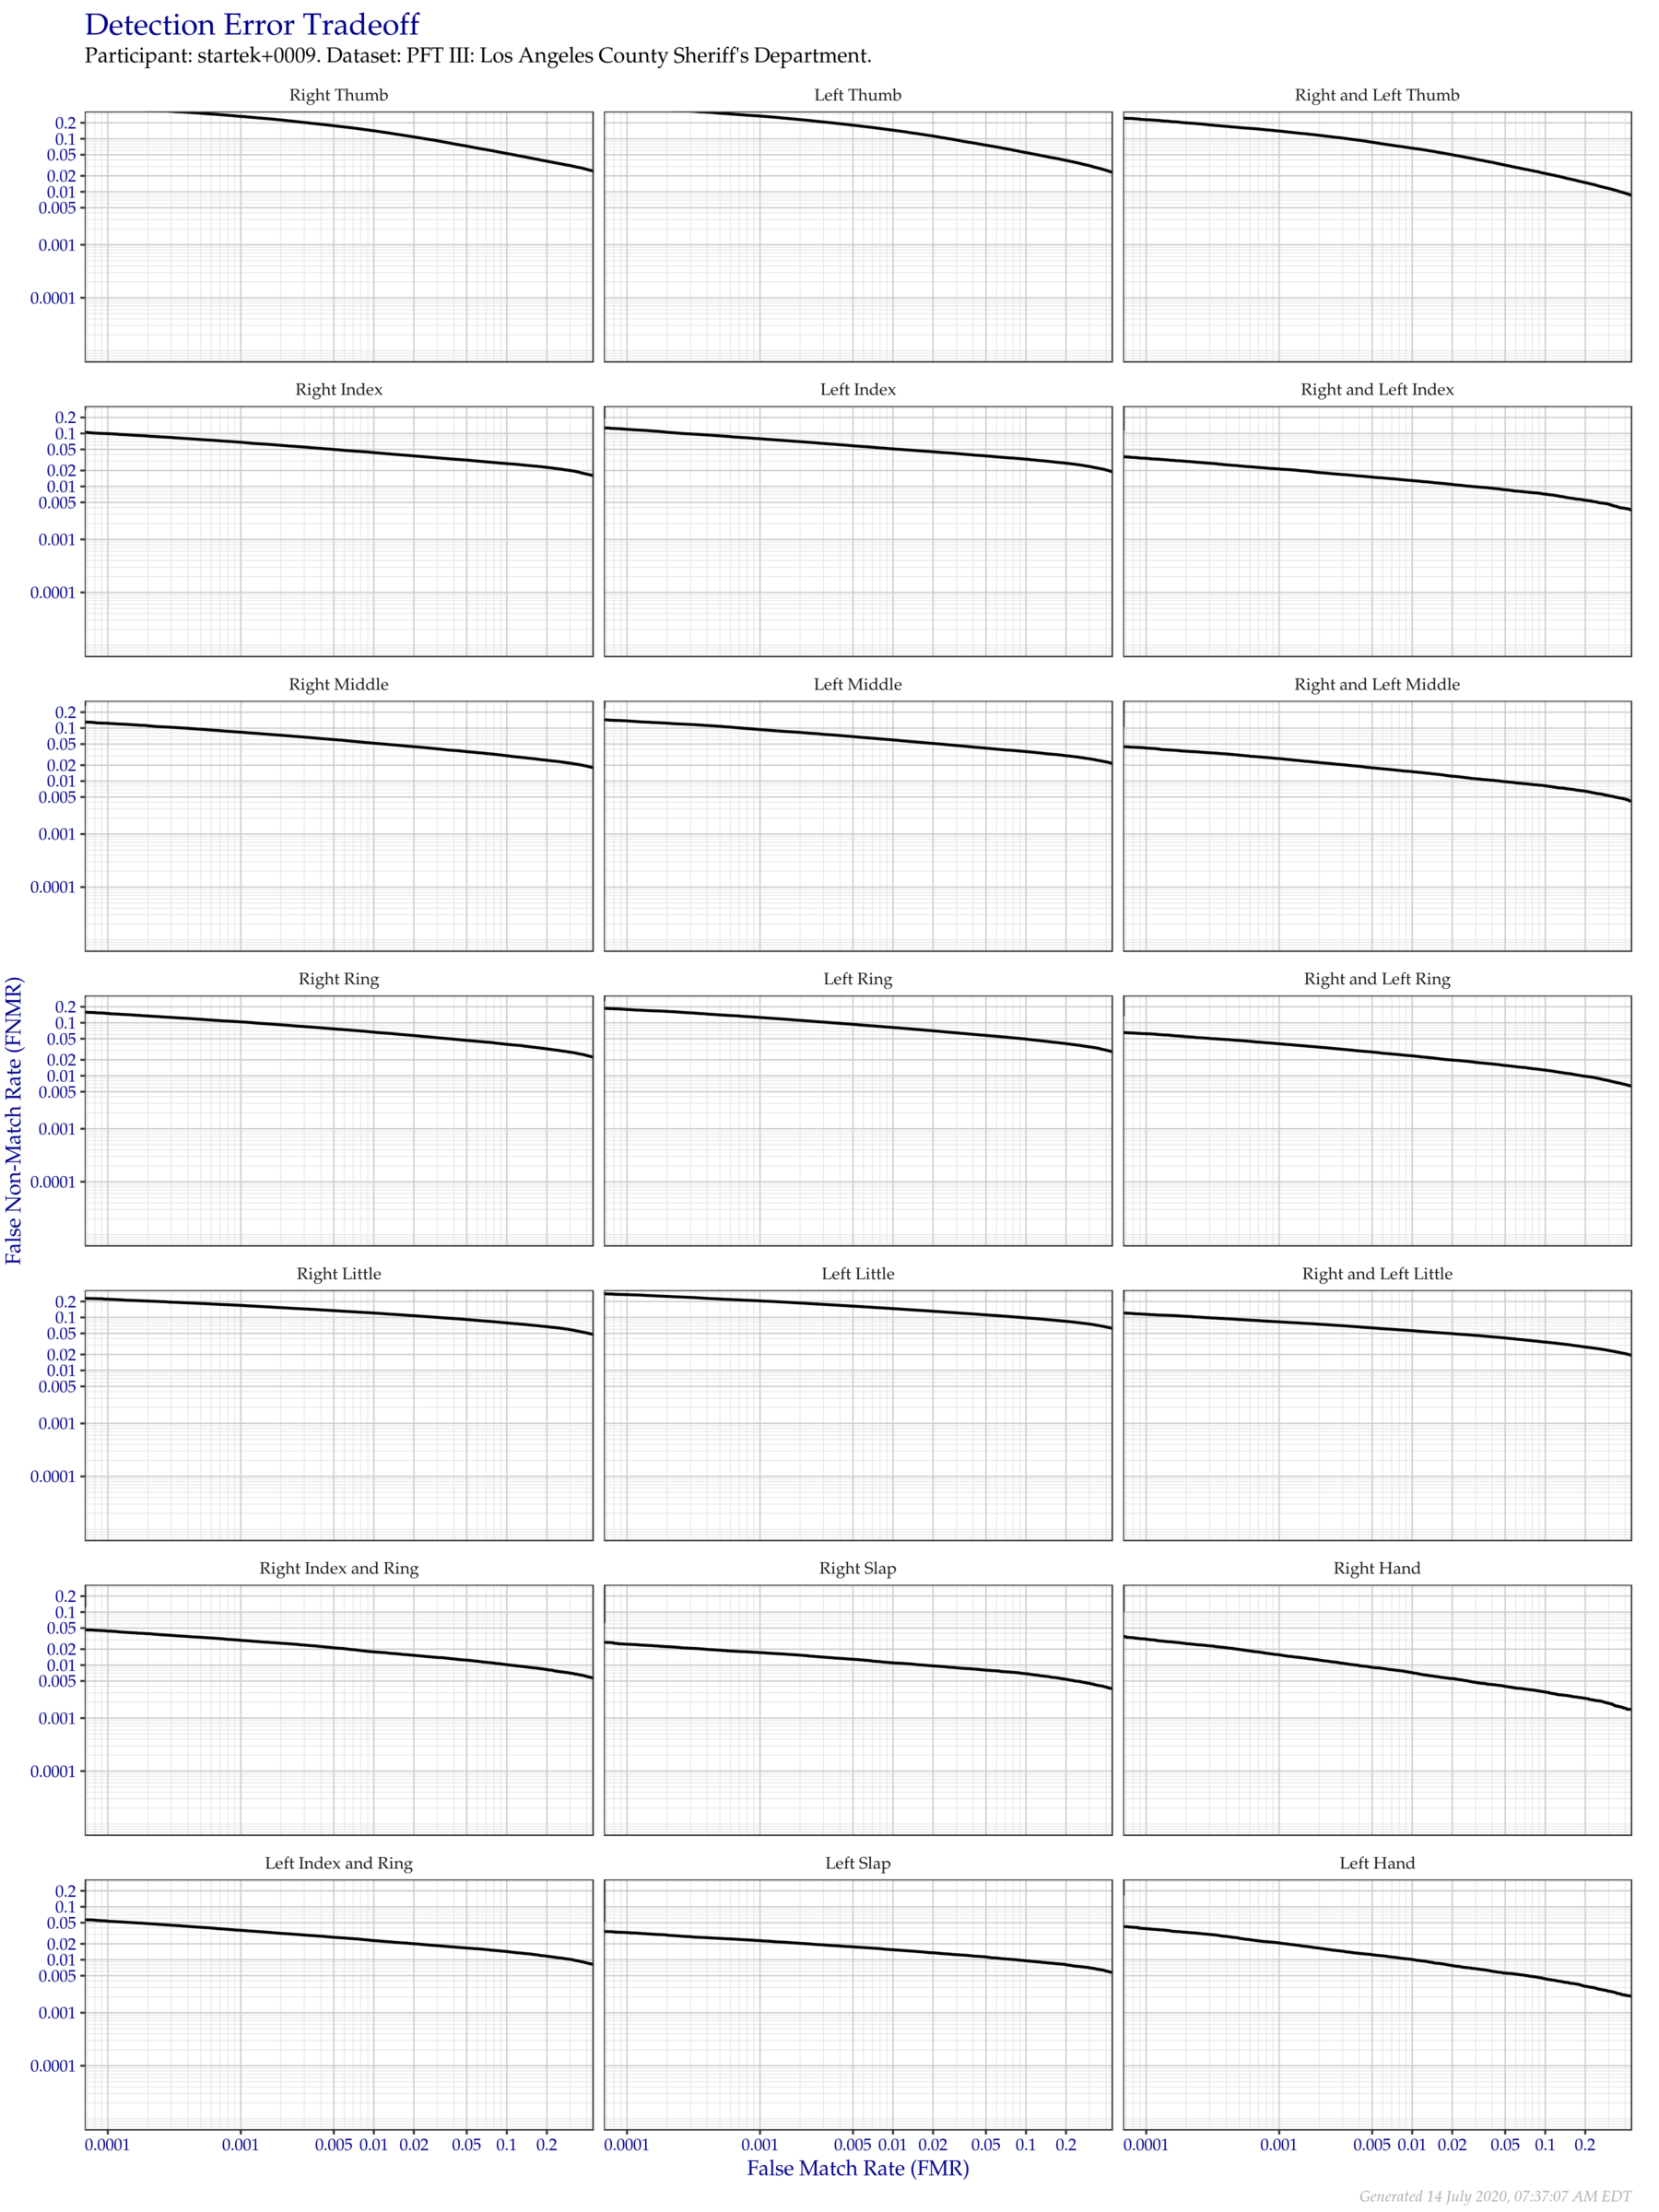 Detection error tradeoff of all comparisons from all fingers in the PFT III LASD dataset, separated by finger position. Combined finger positions were generated by sum fusion.